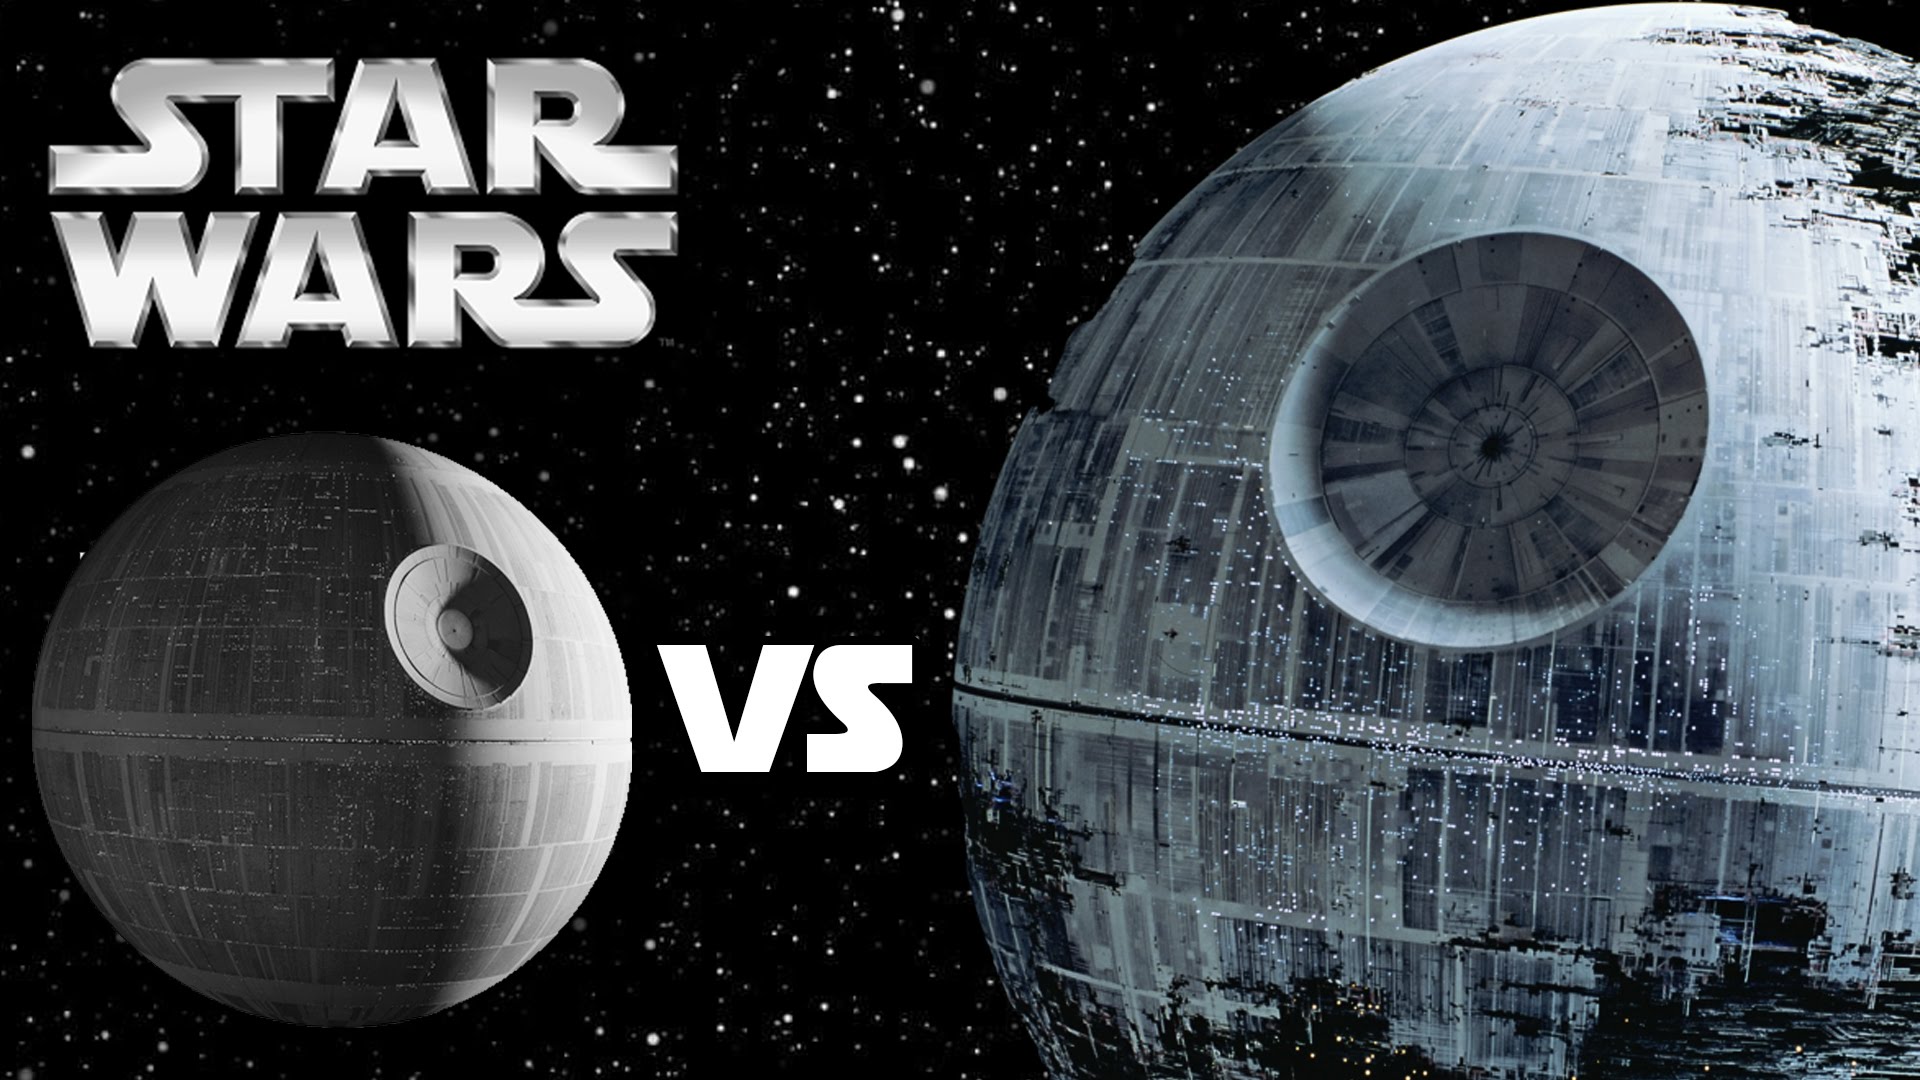 Death Star 1 vs Death Star 2: Complete History, Differences and Facts - Star Wars Revealed 1